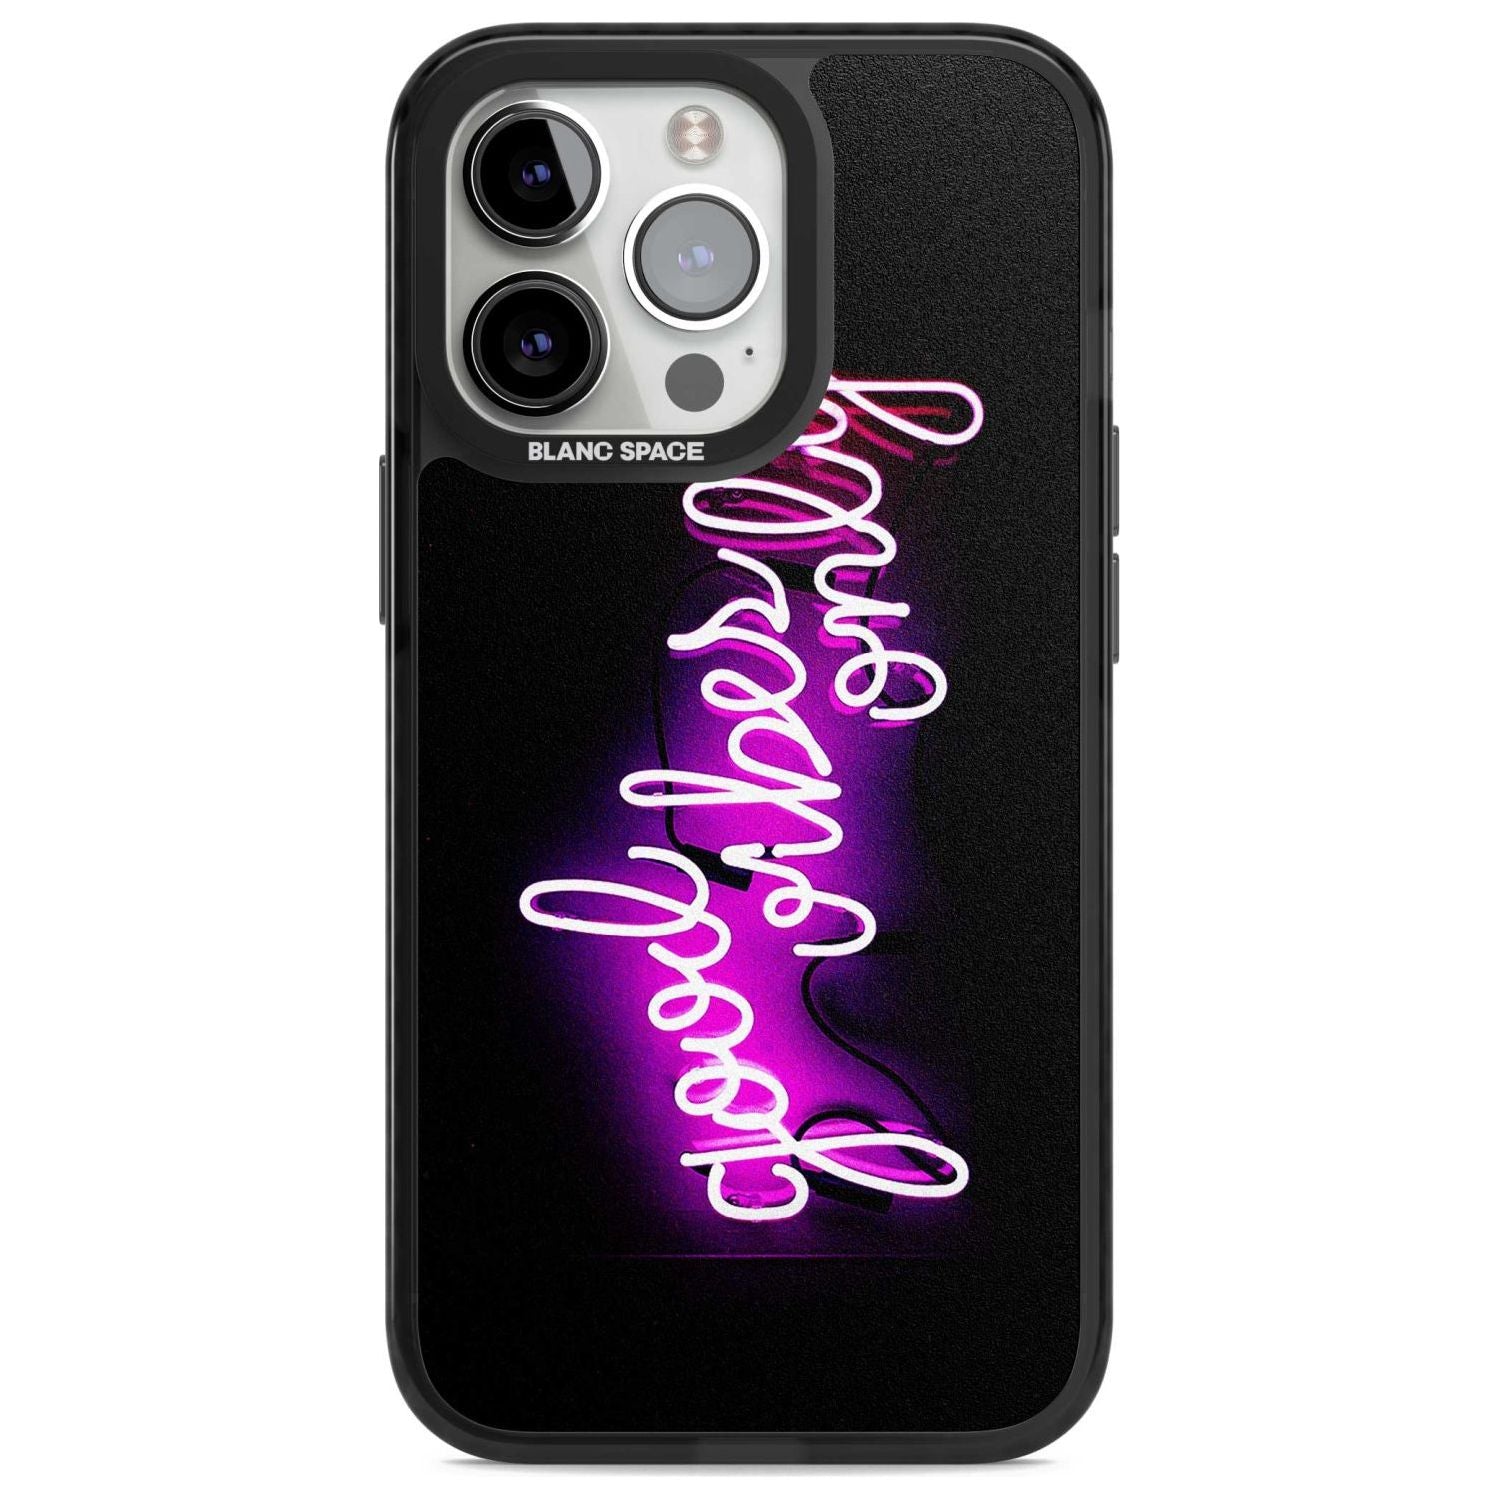 Good Vibes Only Pink Neon Phone Case iPhone 15 Pro Max / Magsafe Black Impact Case,iPhone 15 Pro / Magsafe Black Impact Case,iPhone 14 Pro Max / Magsafe Black Impact Case,iPhone 14 Pro / Magsafe Black Impact Case,iPhone 13 Pro / Magsafe Black Impact Case Blanc Space